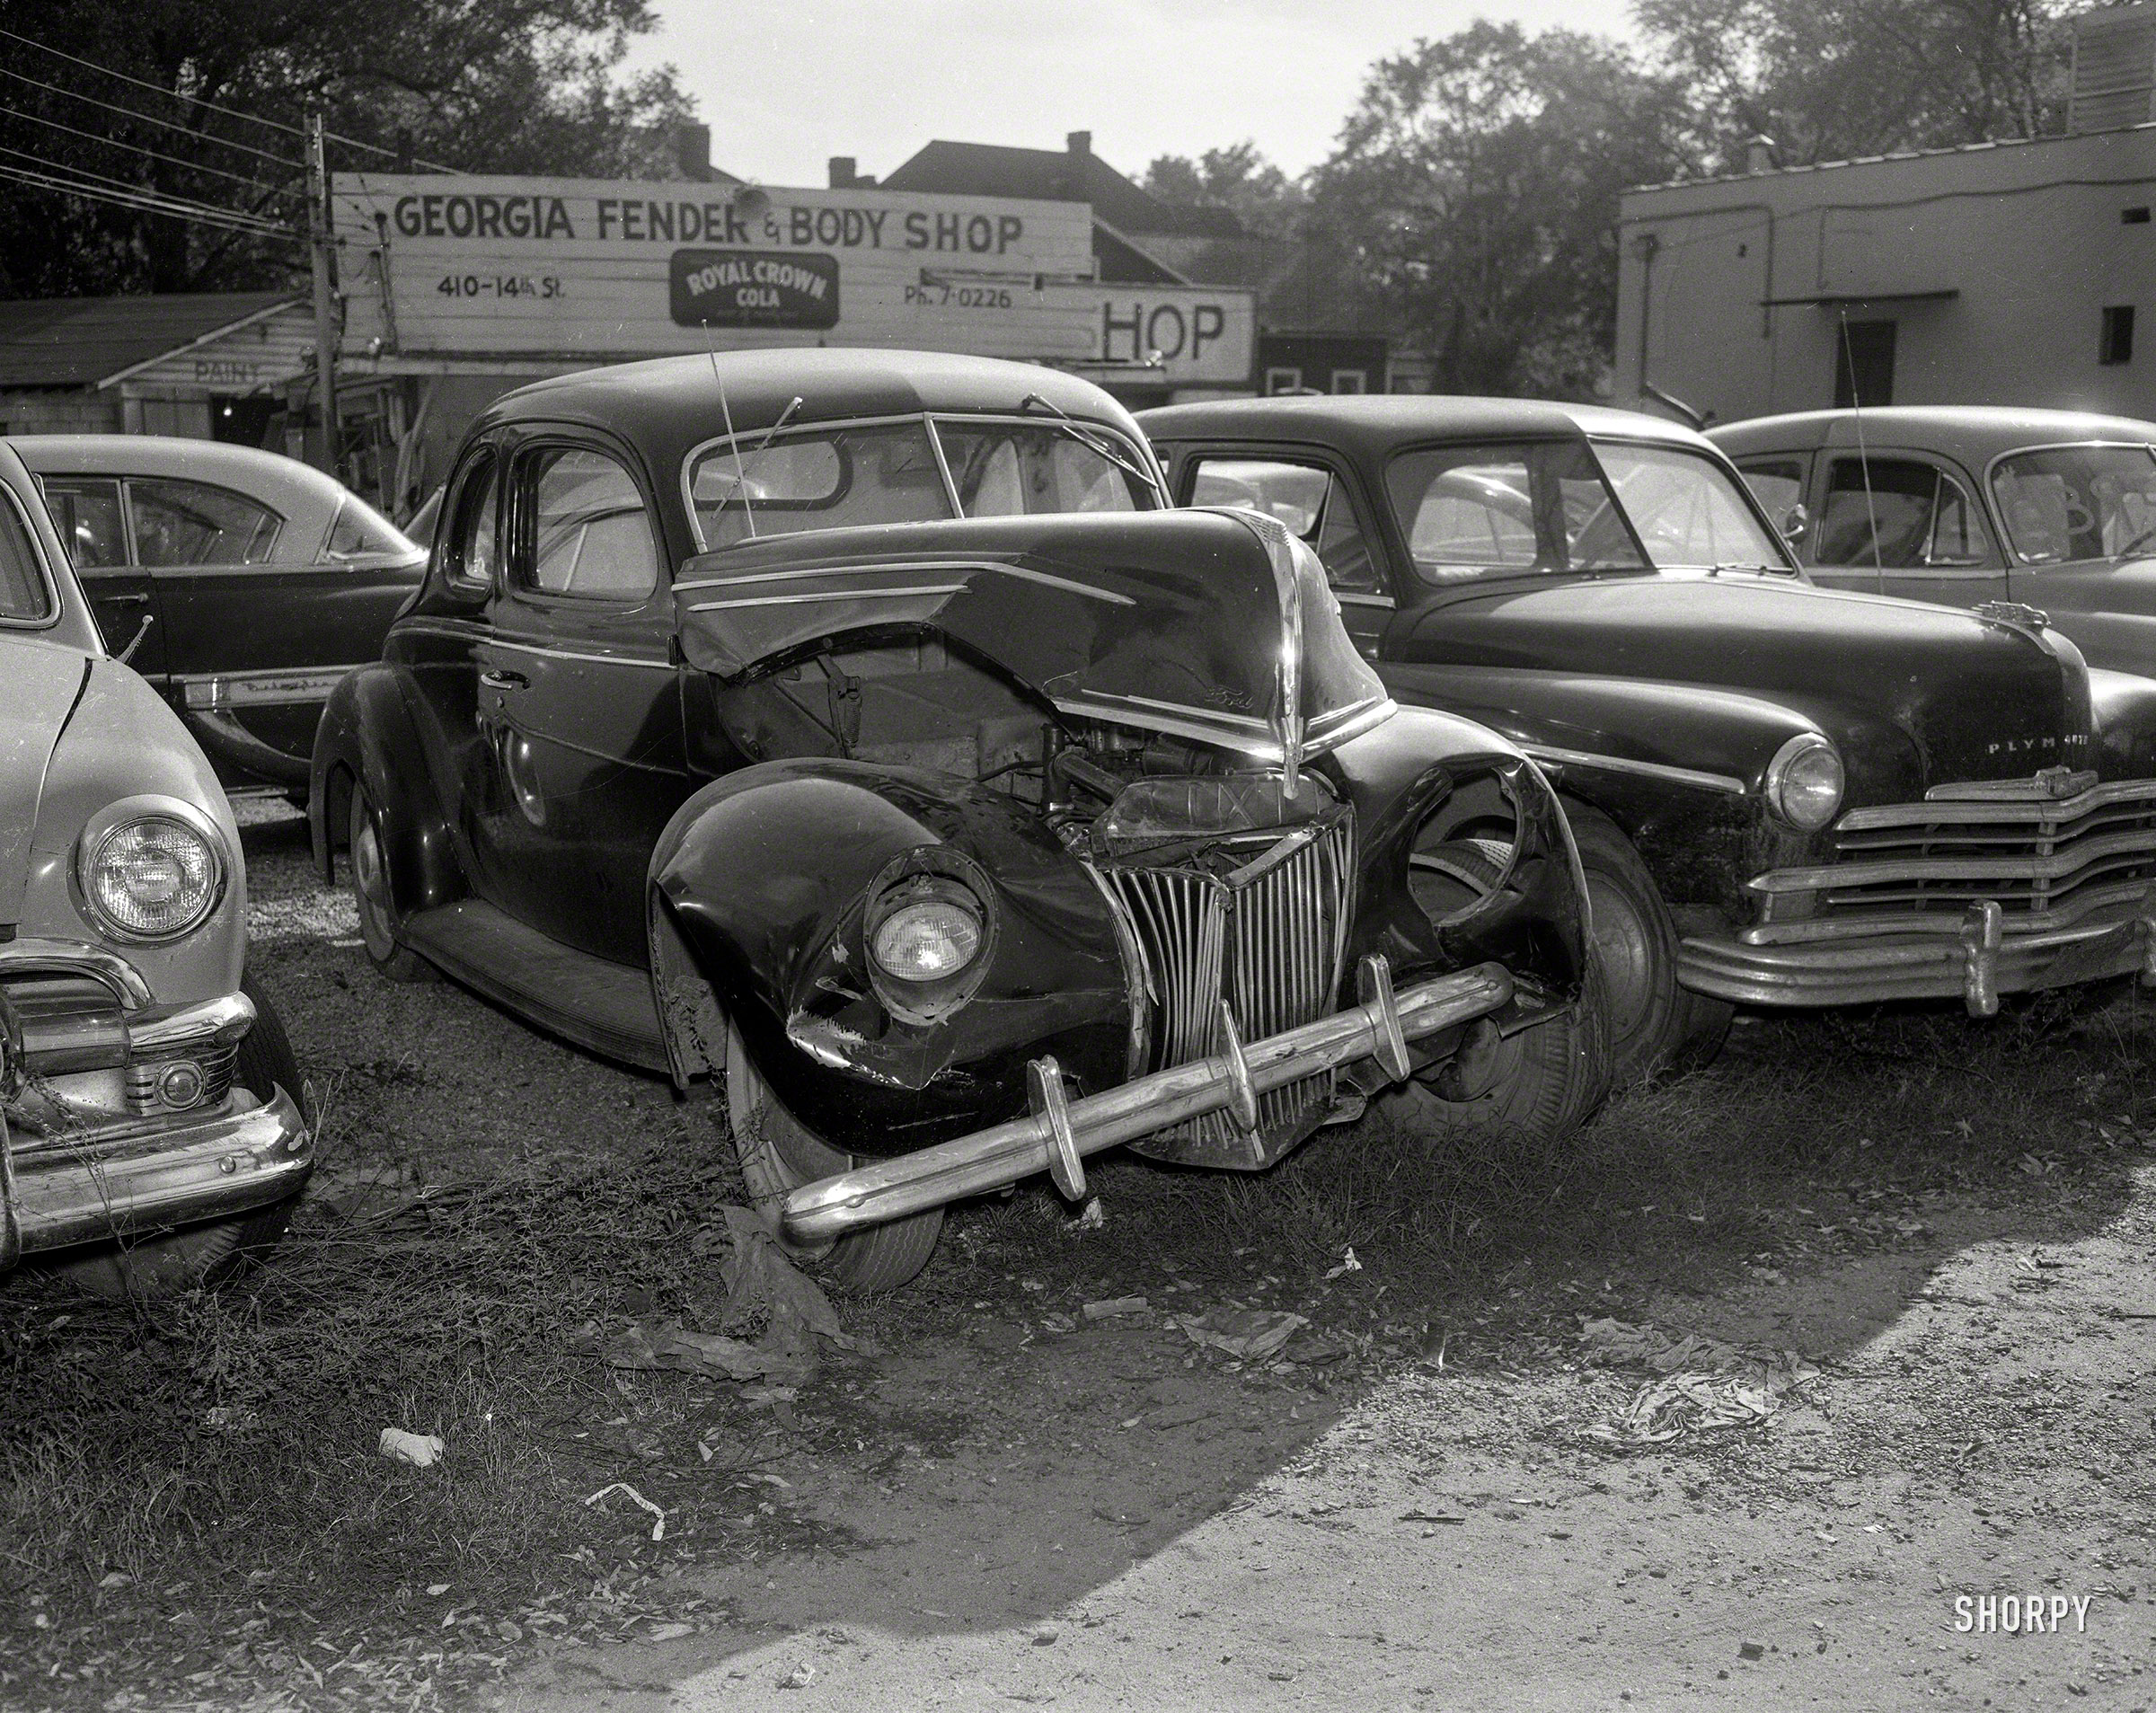 Columbus, Georgia, circa 1955. "Wrecked Ford at Georgia Fender." 4x5 inch acetate negative from the Shorpy News Photo Archive. View full size.